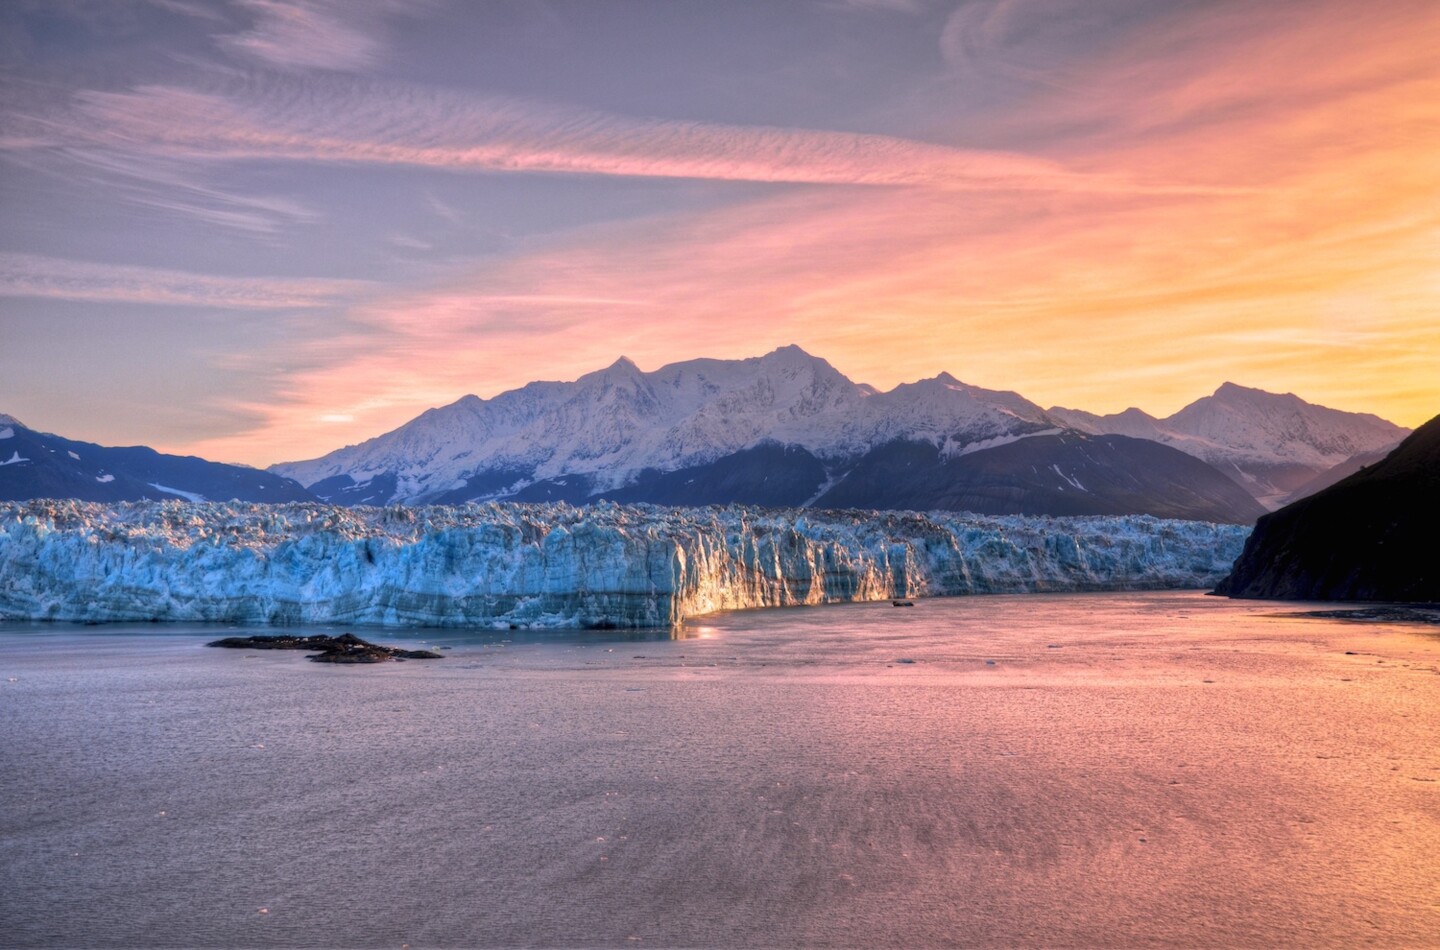 <h2>The best time to cruise to Alaska</h2>              <p><b>The best time to cruise in Alaska is generally between</b> <b>May and September. </b></p> <p>The Alaska cruise season, like the <a class="Link" href="https://www.afar.com/magazine/9-unique-ways-to-visit-alaska-this-summer" rel="noopener">49th state’s summer</a>, is all too brief. The vast majority of sailings, particularly those along the Inside Passage (the island-filled coastal waterway in the southeast portion of the state), occur somewhere between Memorial Day and Labor Day. That being said, there are some shoulder-season departures in April, May, September, and October.</p> <p>The best time to visit also depends on your tolerance for the cold and for other travelers. Those shoulder-season trips are chilly (there’s a good chance you’ll see snow in places and will need to bundle up more), but there are significantly fewer tourists to do battle with during shore excursions. However, the peak season (July and August) is divine. The sun hardly sets, the landscapes (save for the glaciers) are verdant, and the waterways are choked with playful whales getting their fill before winter.</p> <h2>Best Alaska cruises to book</h2>